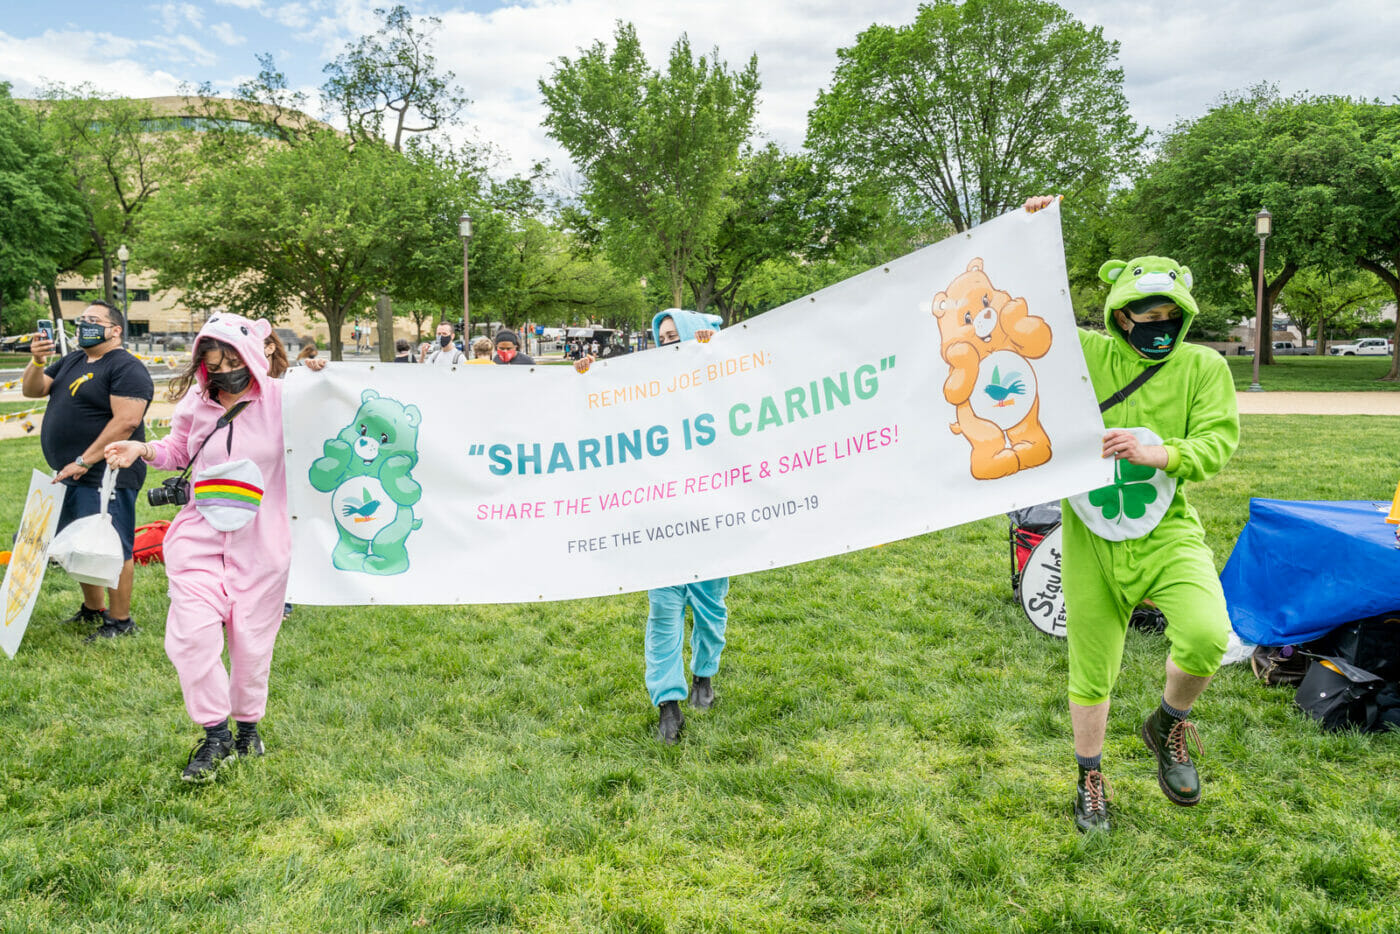 Care Bears hold a banner aloft reading "Sharing is Caring"